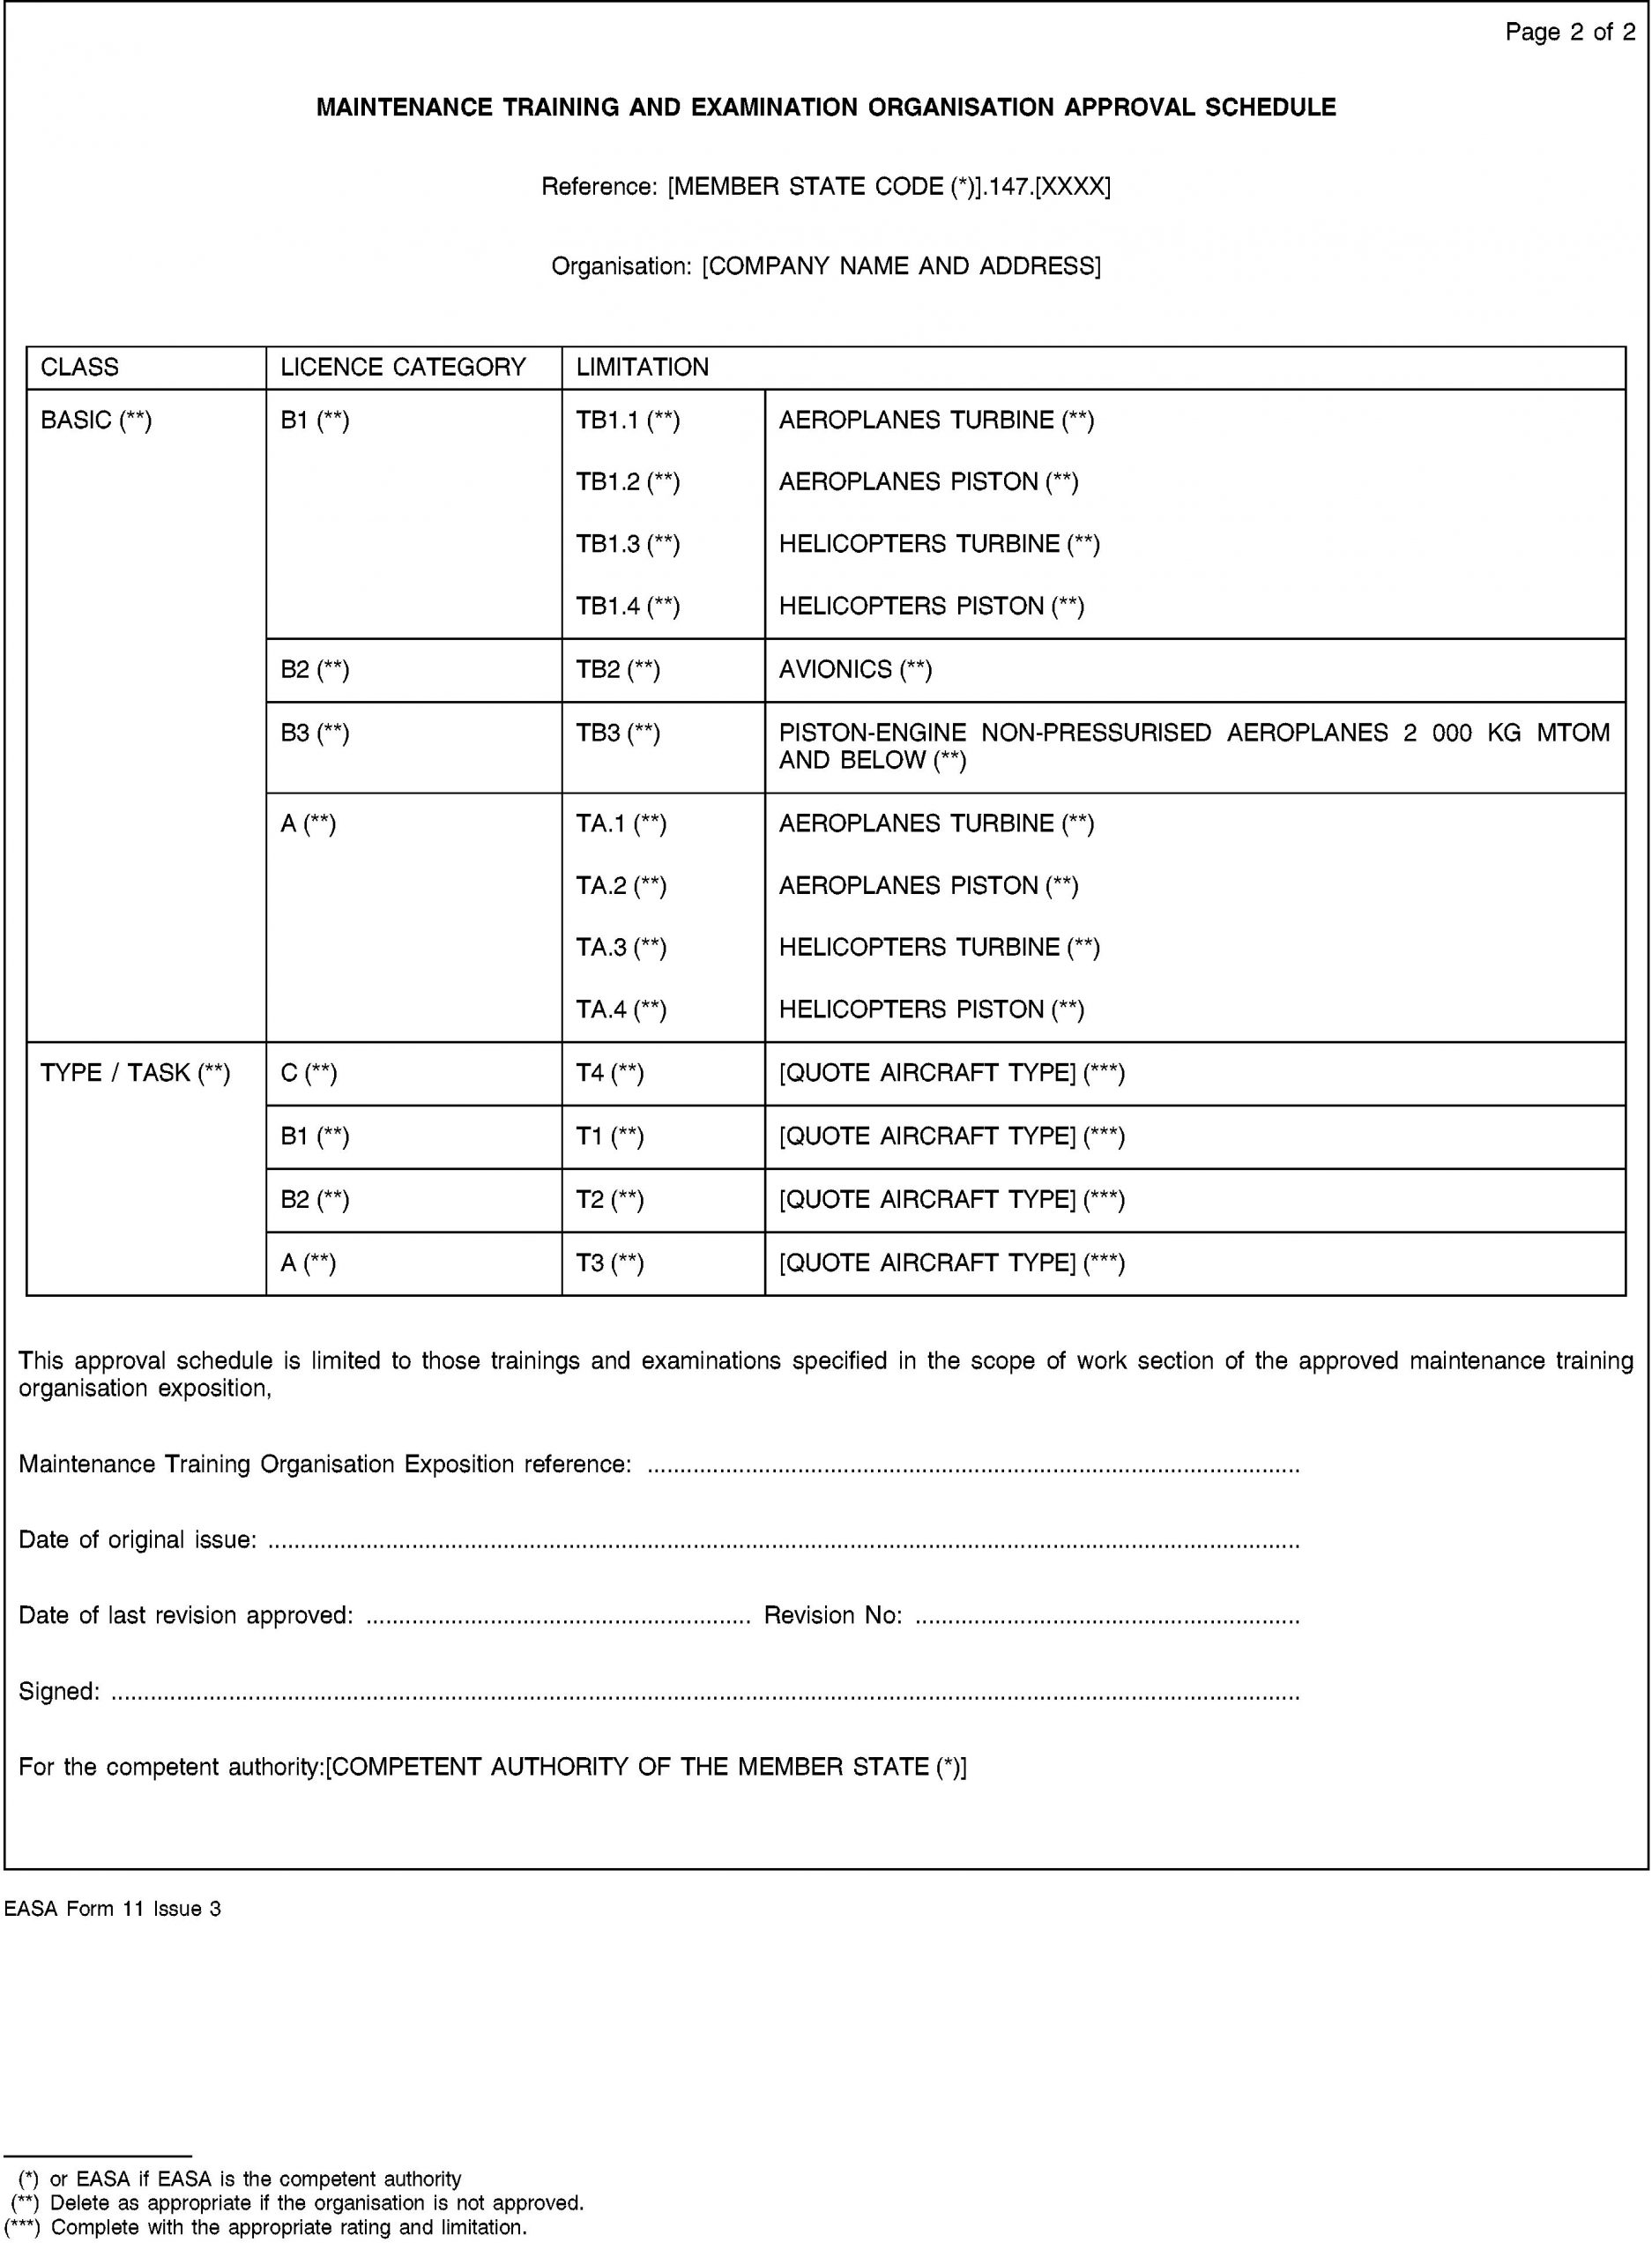 Heating and Cooling Curves Worksheet Consolidated Text R2042 — En — 01 08 2012